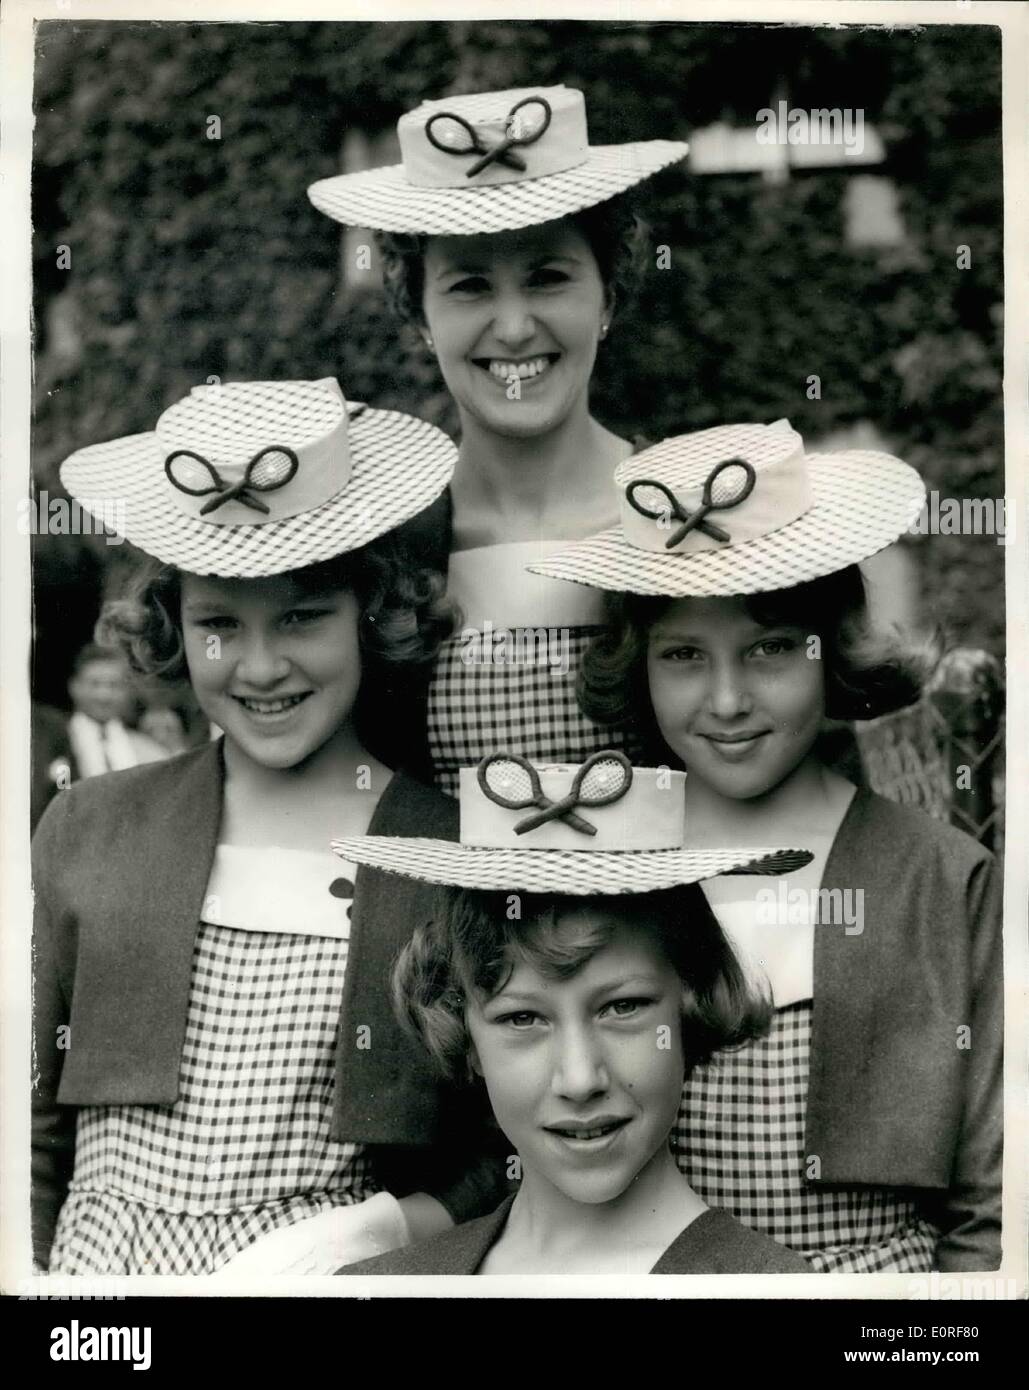 Jun. 06, 1959 - Wimbledon - Second Day: Hats - and Suits - All Alike: Photo Shows Mrs. Jean Carpenter of the Shipton-under-Wyohwood, Oxford - with her daughters - Twins in centre - Wendy - left and Jane aged 12 - and at bottom Susan (13) - arriving for second day of Wimbledon today. They all wear matching boater hats and identical suits - all made by mother. Stock Photo